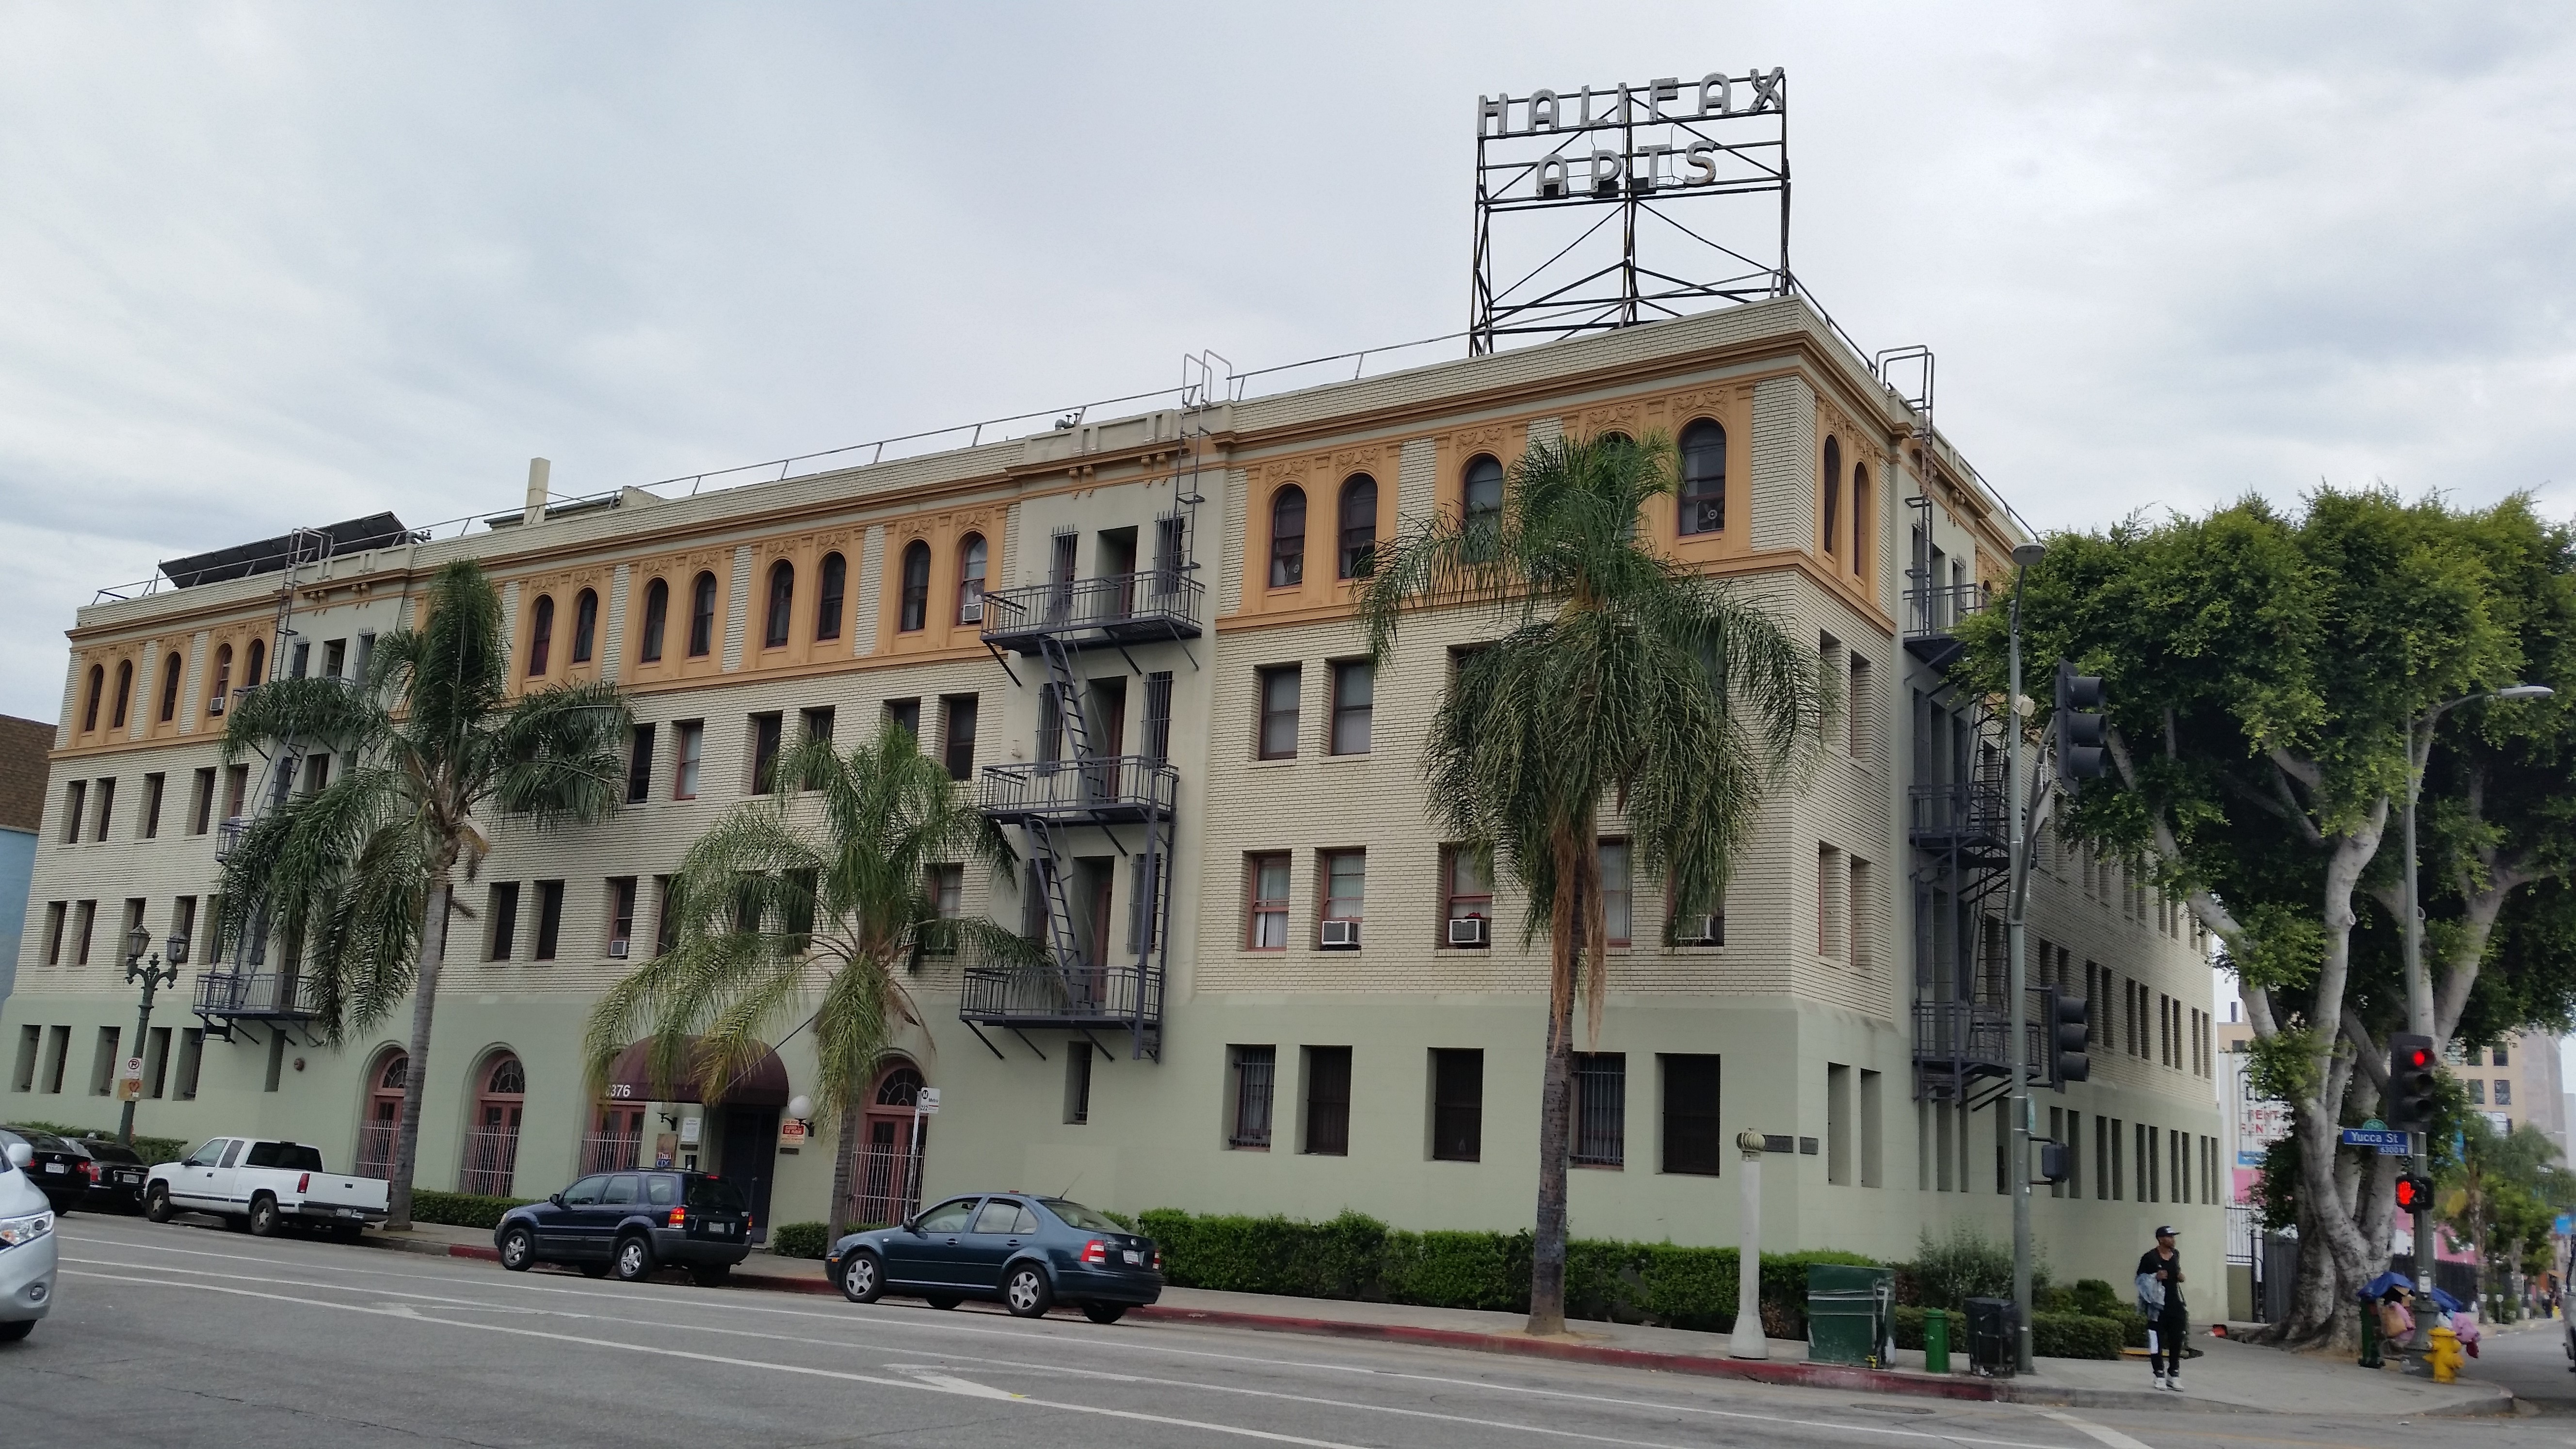 Street view of 4 story white, brick building with fire escapes and hedges along building, some units with a/c, some windows have bars, strre parkingin front of building